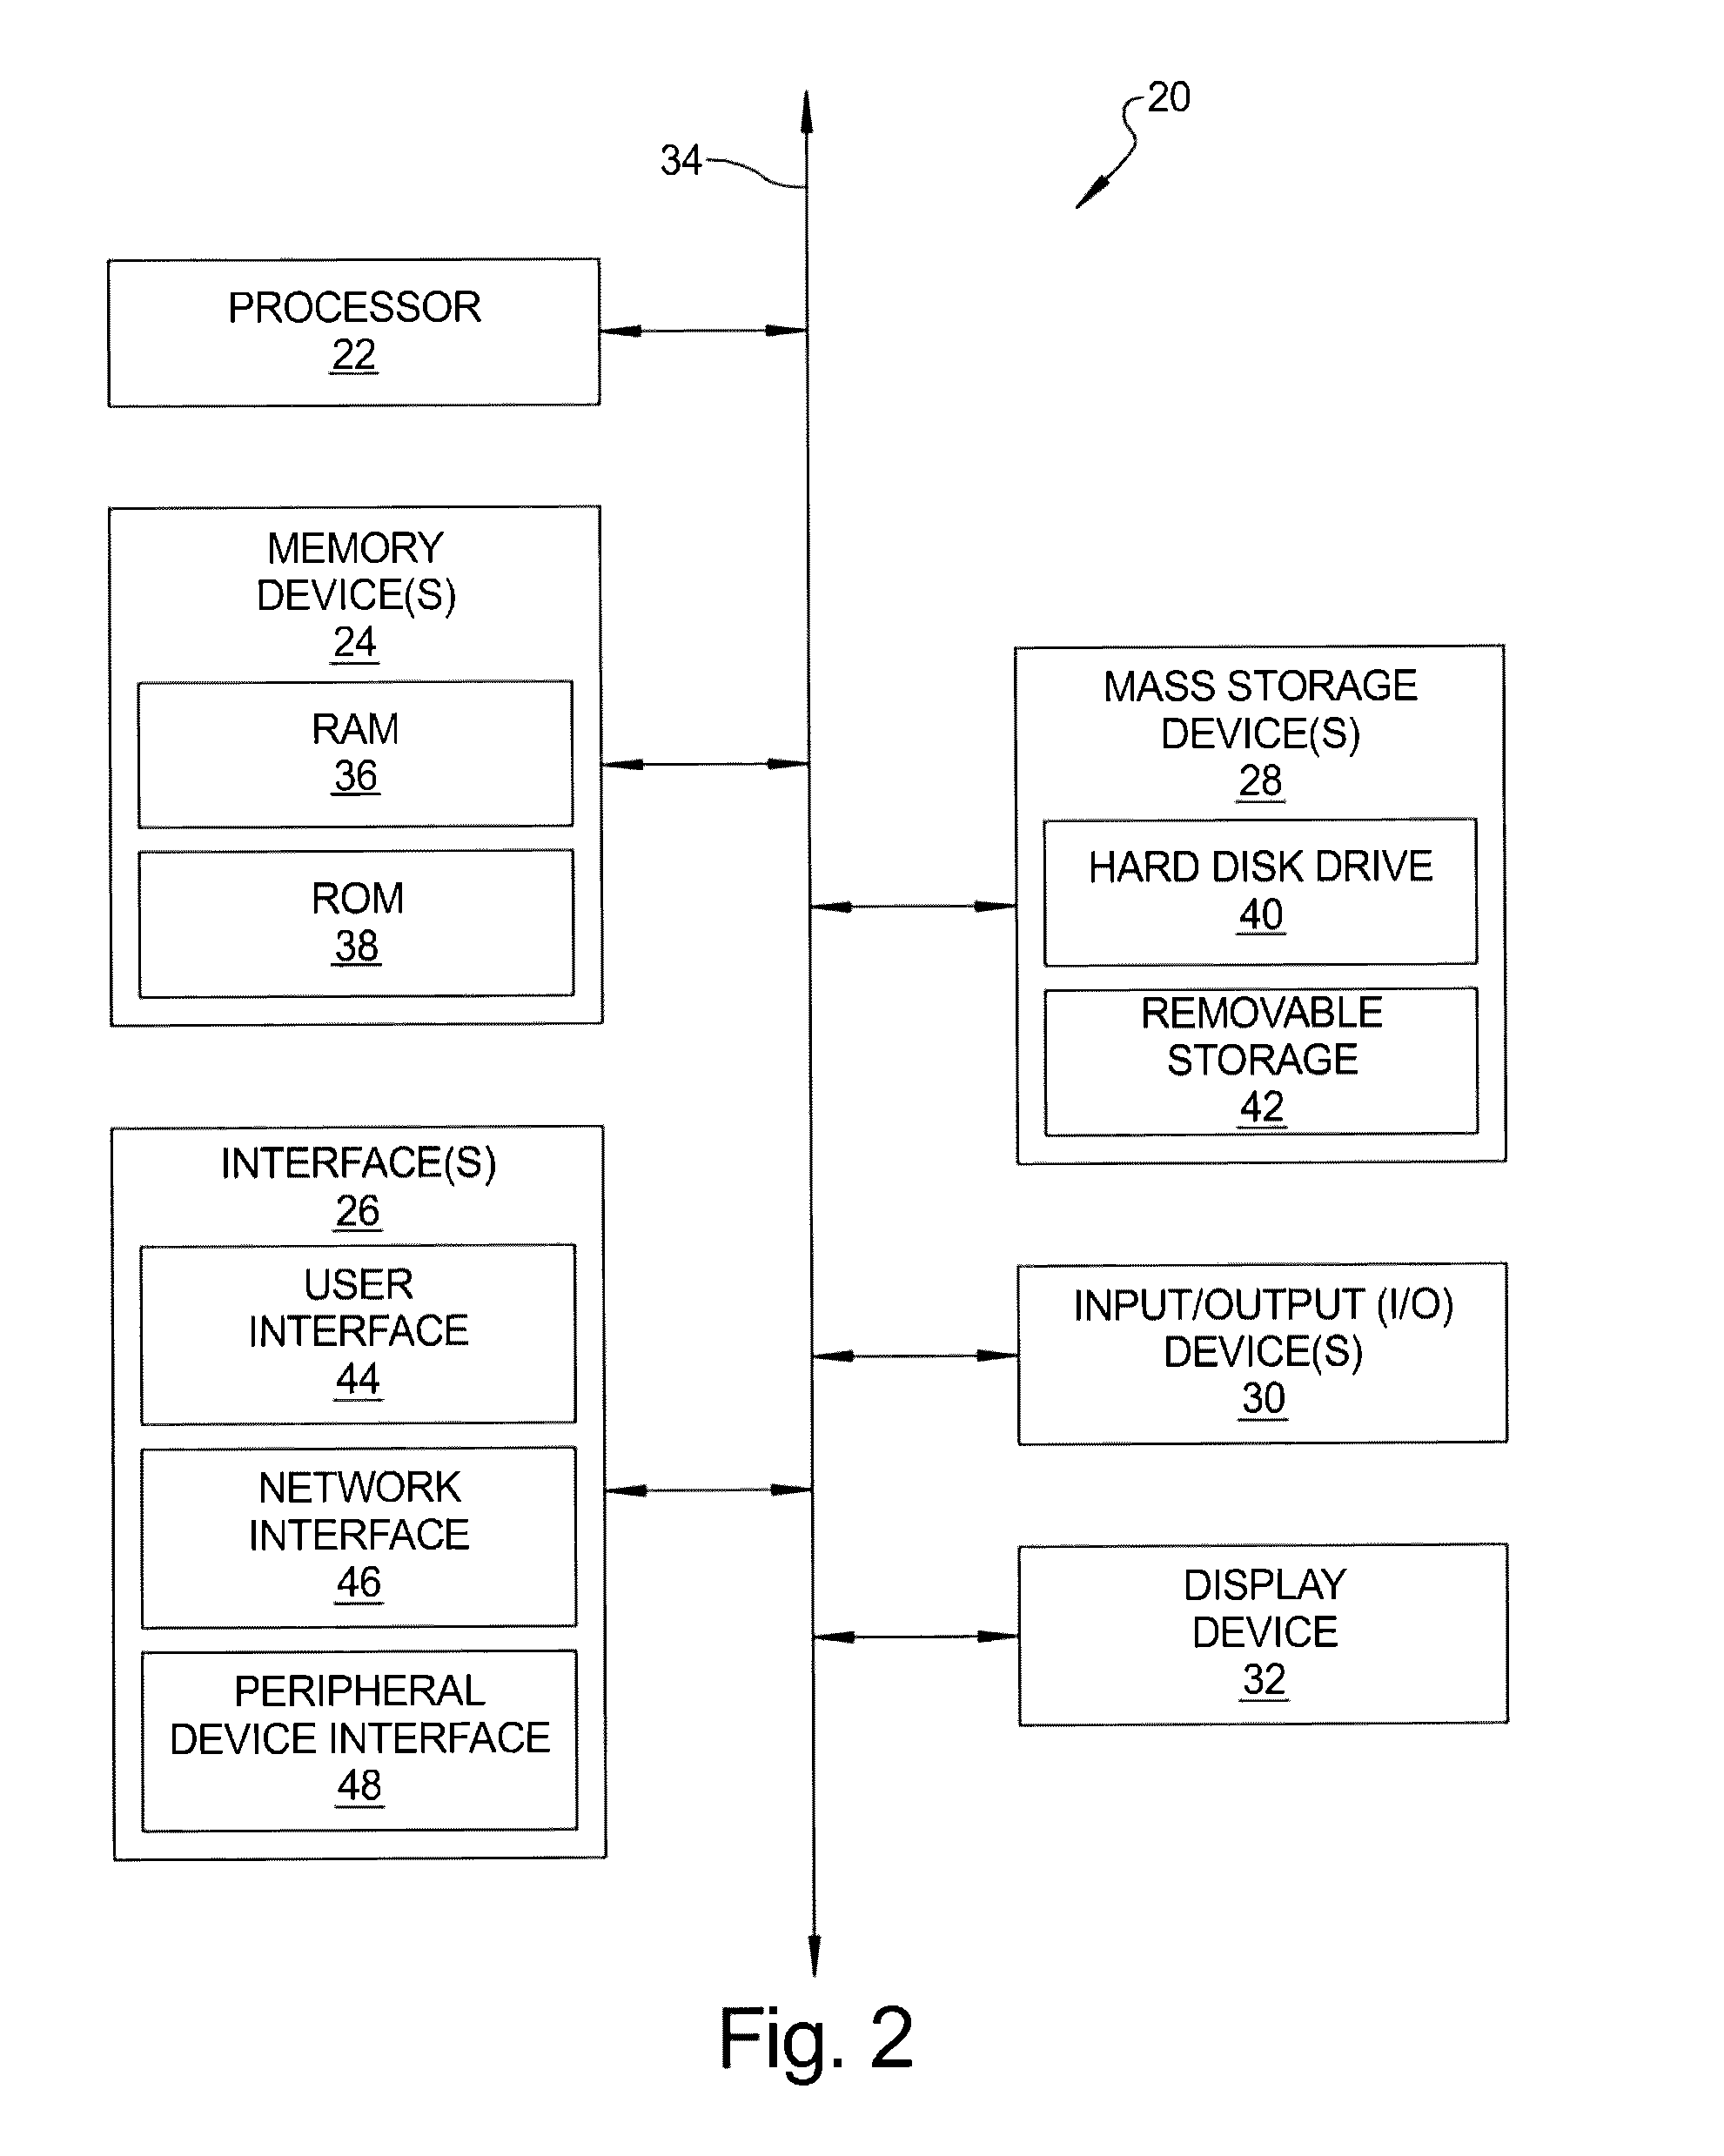 System, method, and non-transitory computer-readable storage media for enhancing online product search through multiobjective optimization of product search ranking functions